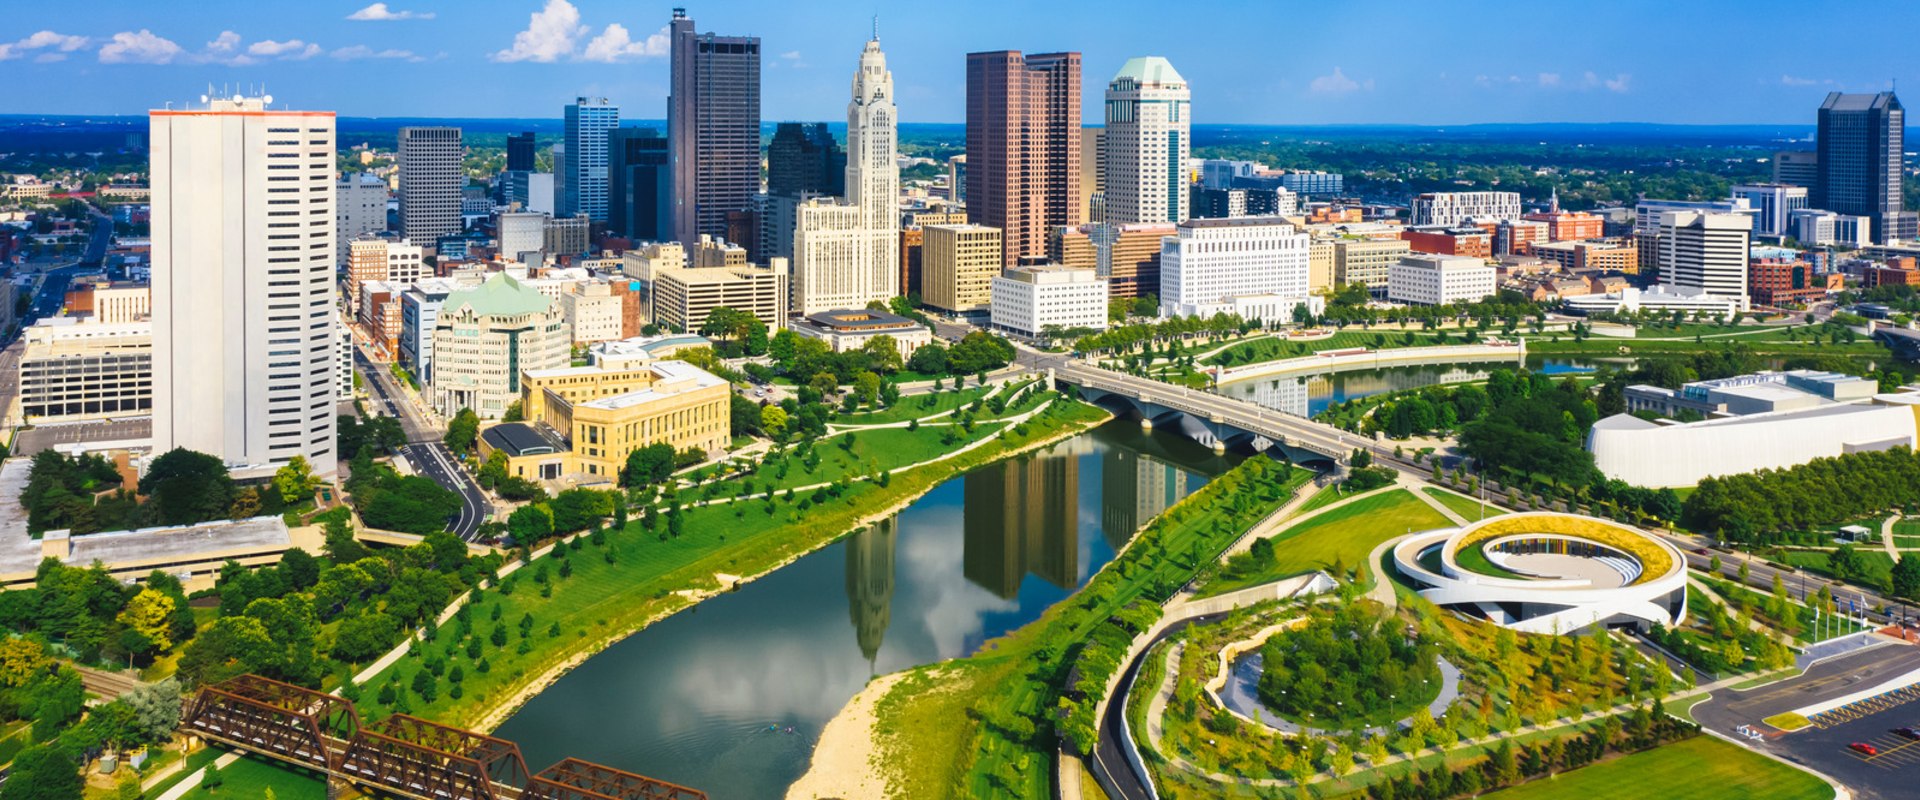 The Best Family-Friendly Neighborhoods in Columbus, Ohio - A Comprehensive Guide